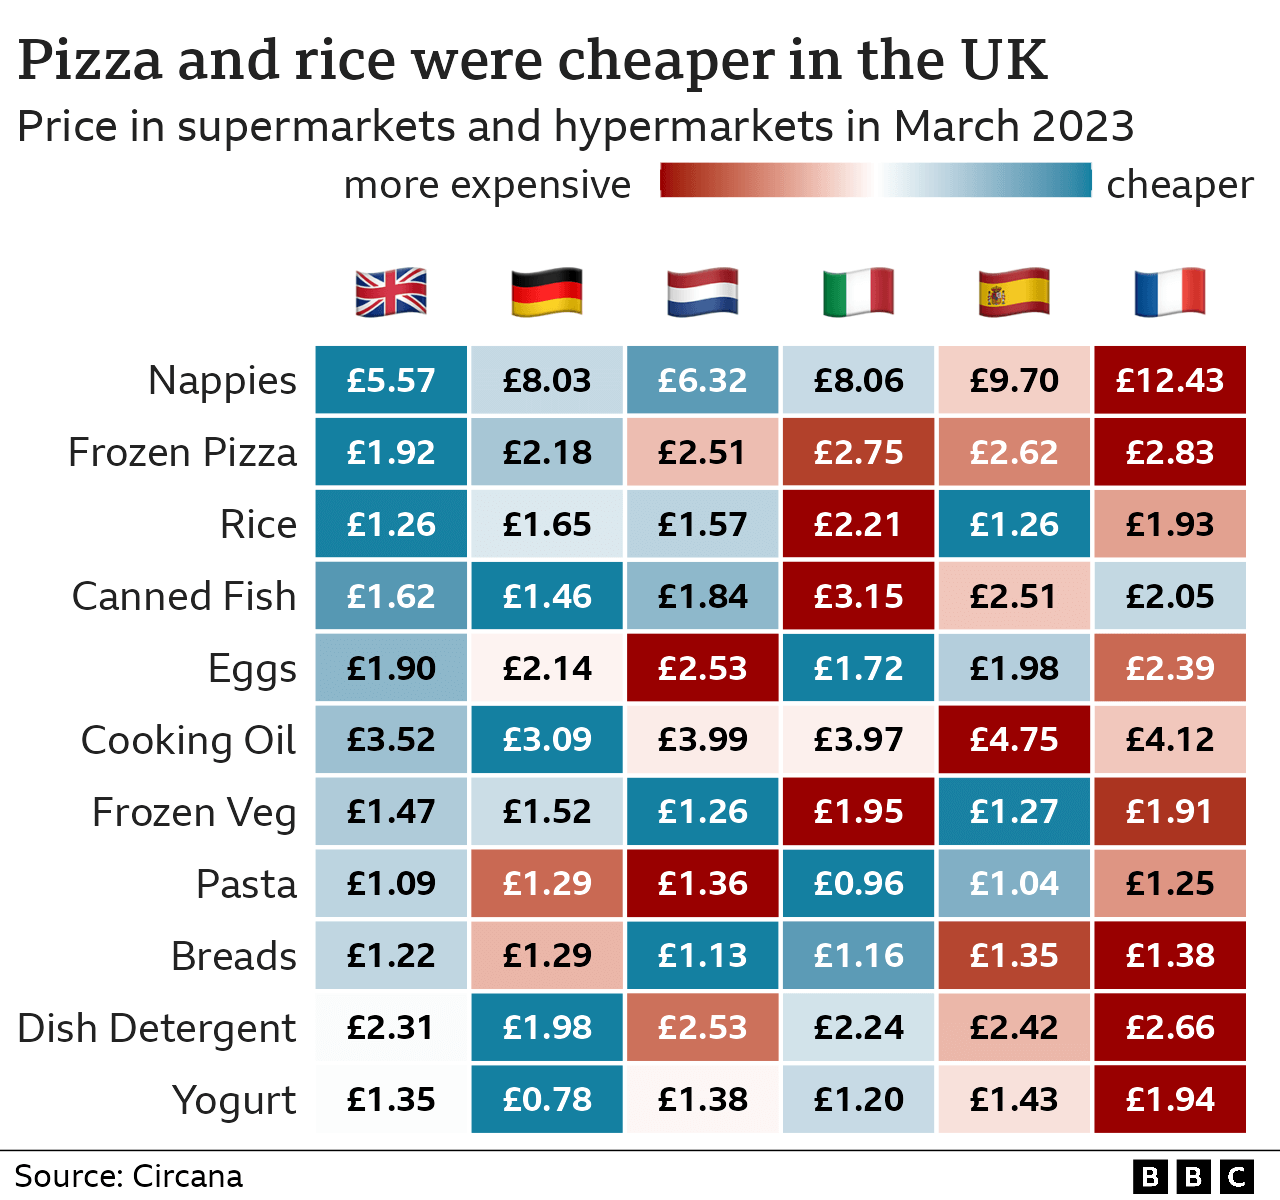 https://ichef.bbci.co.uk/news/640/cpsprodpb/EE91/production/_130037016_optimised-heatmap-cheaper-plot-nc.png